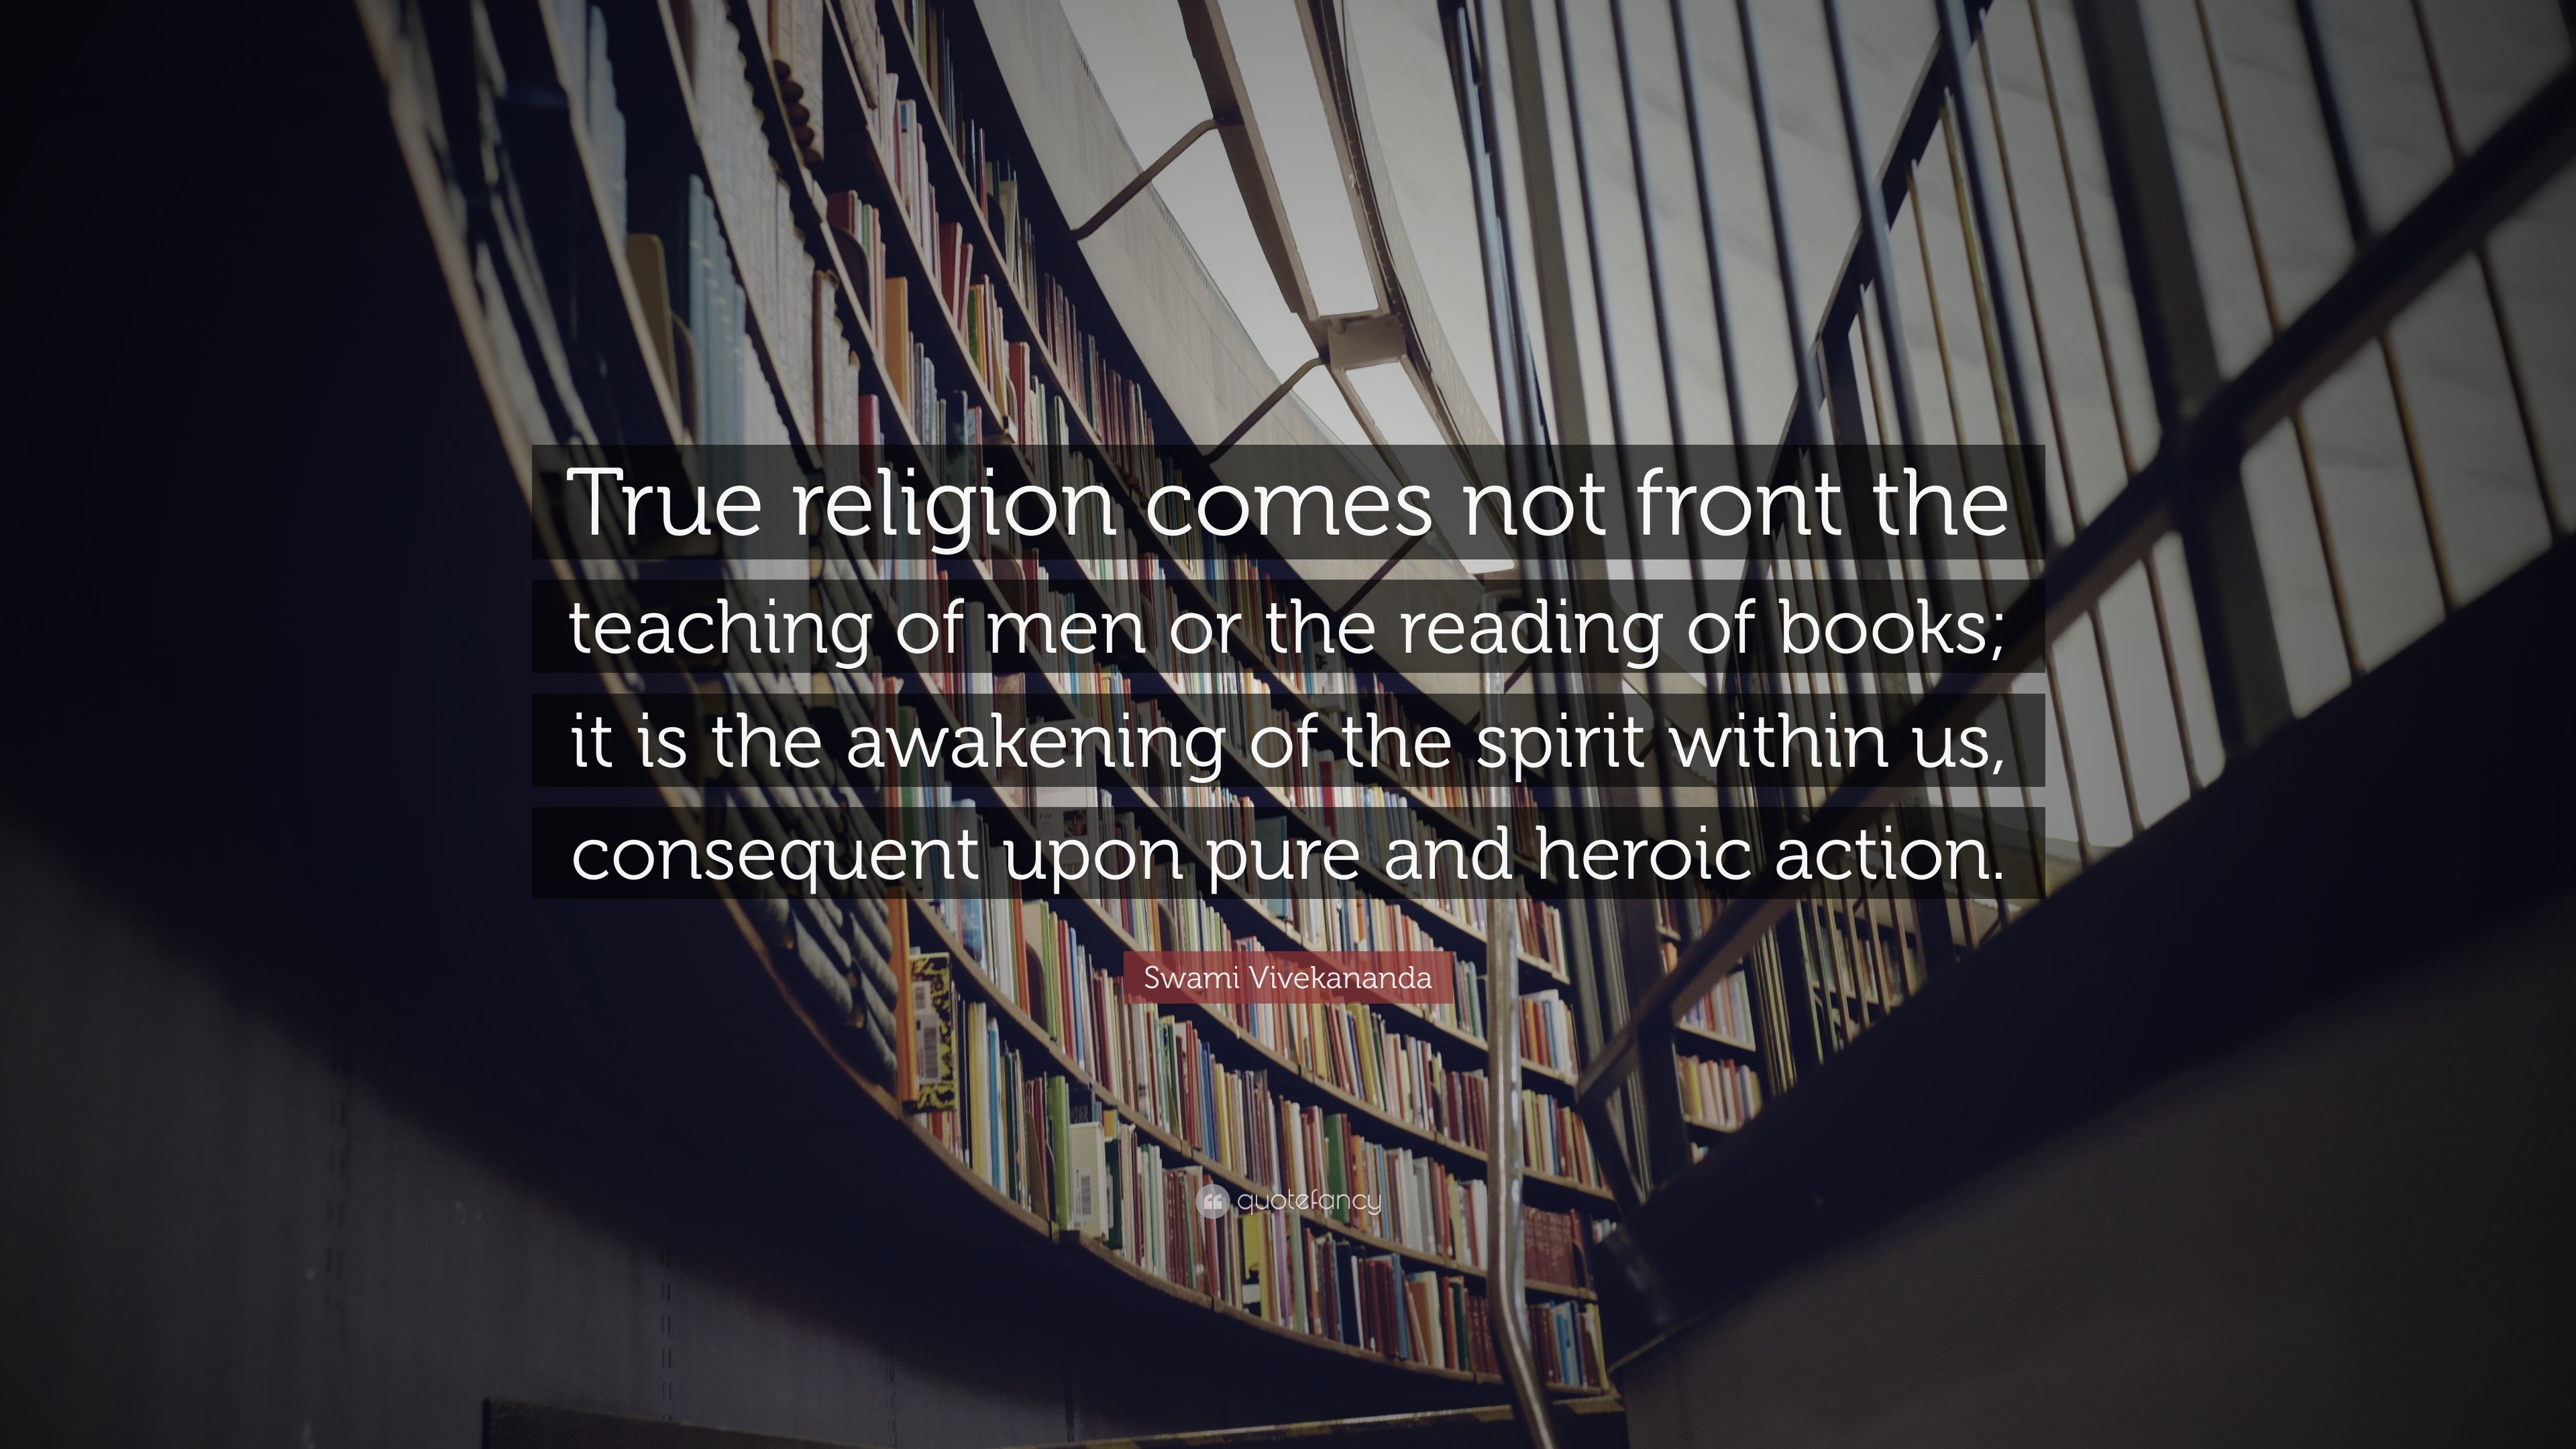 3840x2160 Swami Vivekananda Quote: “True religion comes not front the teaching of men  or the